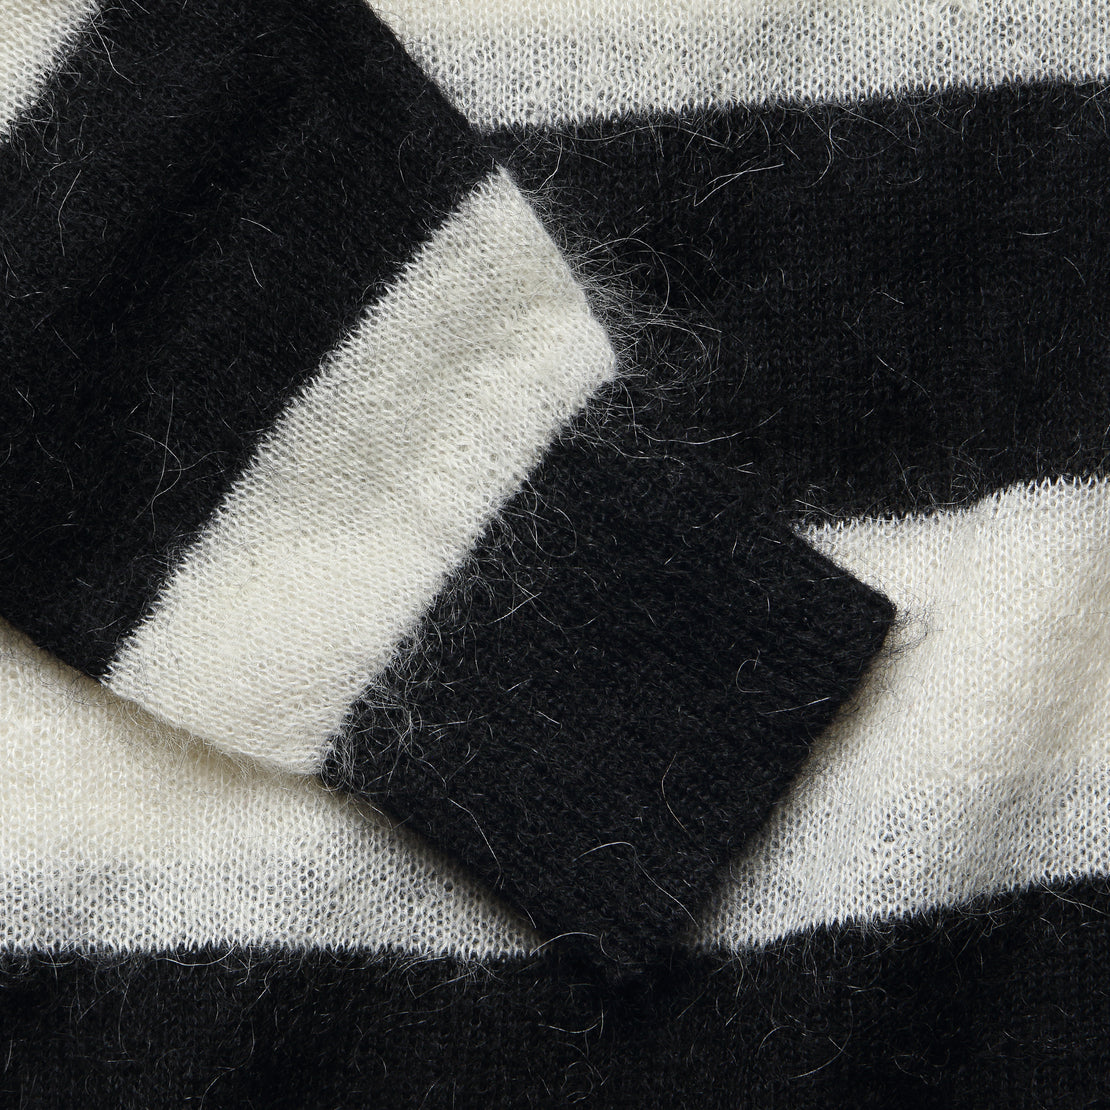 Mohair Rugby Sweater - Black/White - Todd Snyder - STAG Provisions - Tops - Sweater